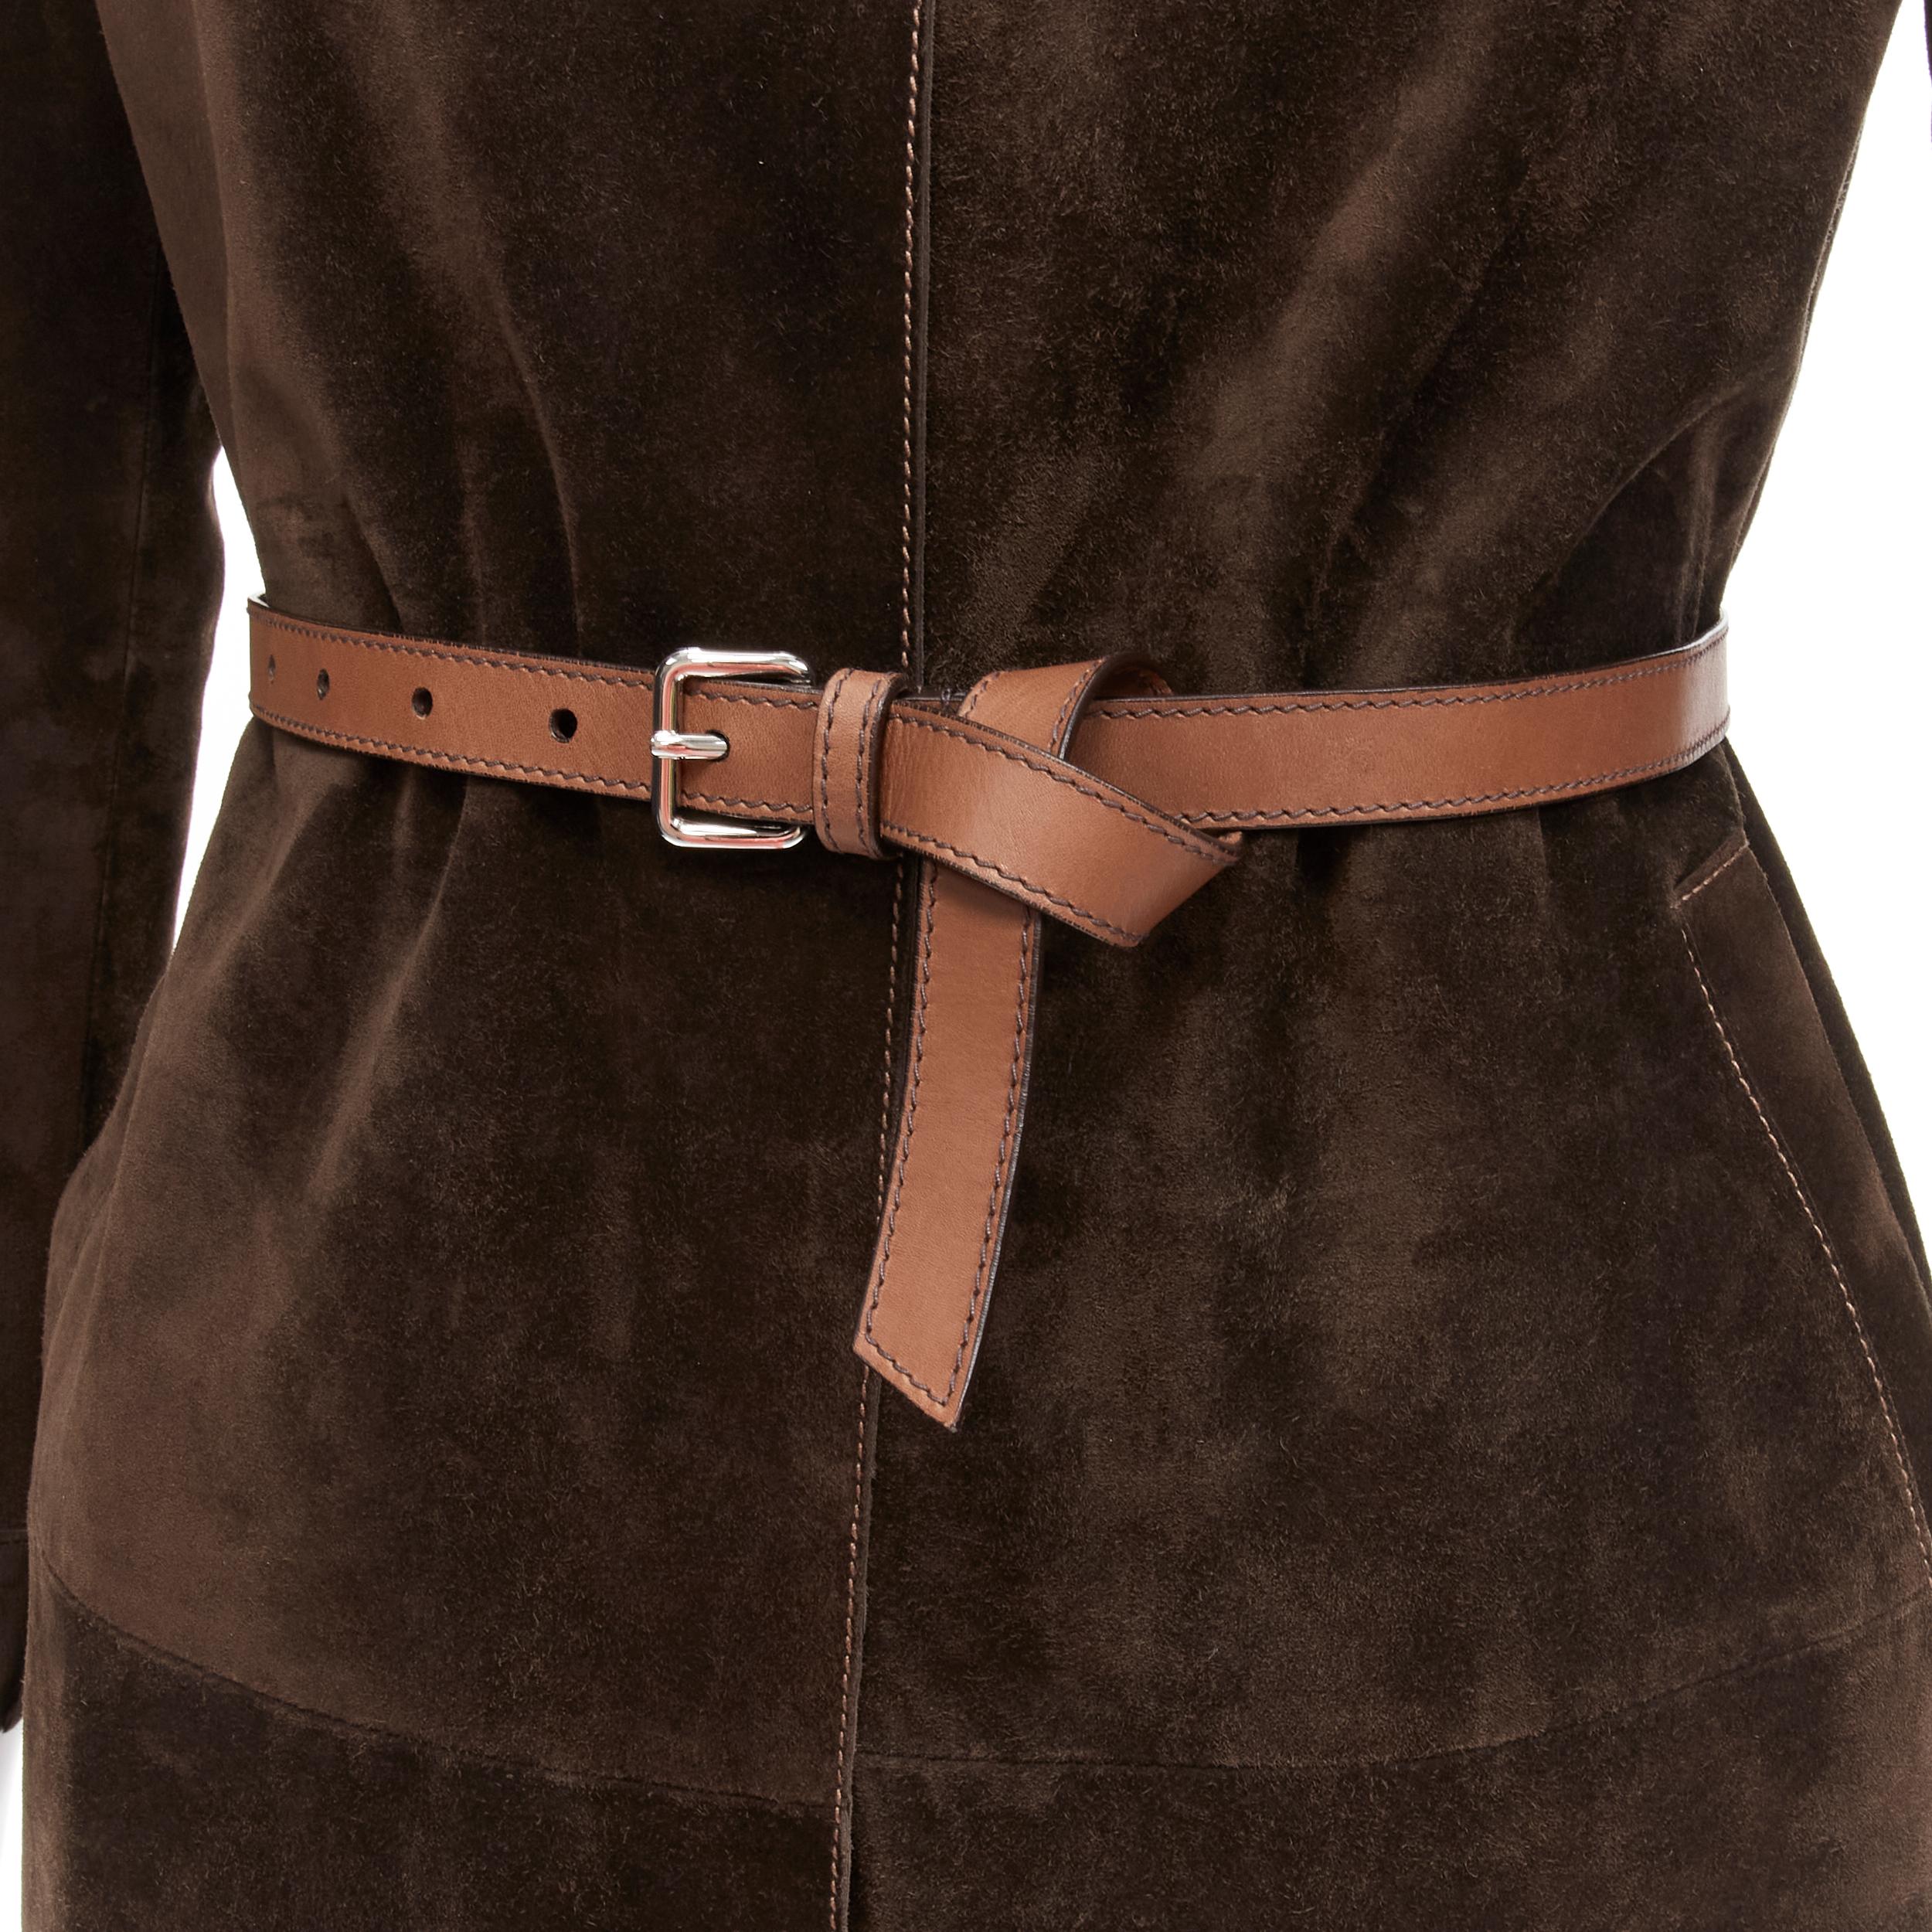 PRADA Vintage brown suede leather belted cuffed sleeve minimal coat IT38 XS
Reference: TGAS/D00133
Brand: Prada
Designer: Miuccia Prada
Material: Suede, Leather
Color: Brown
Pattern: Solid
Closure: Belt
Lining: Brown Leather
Made in: